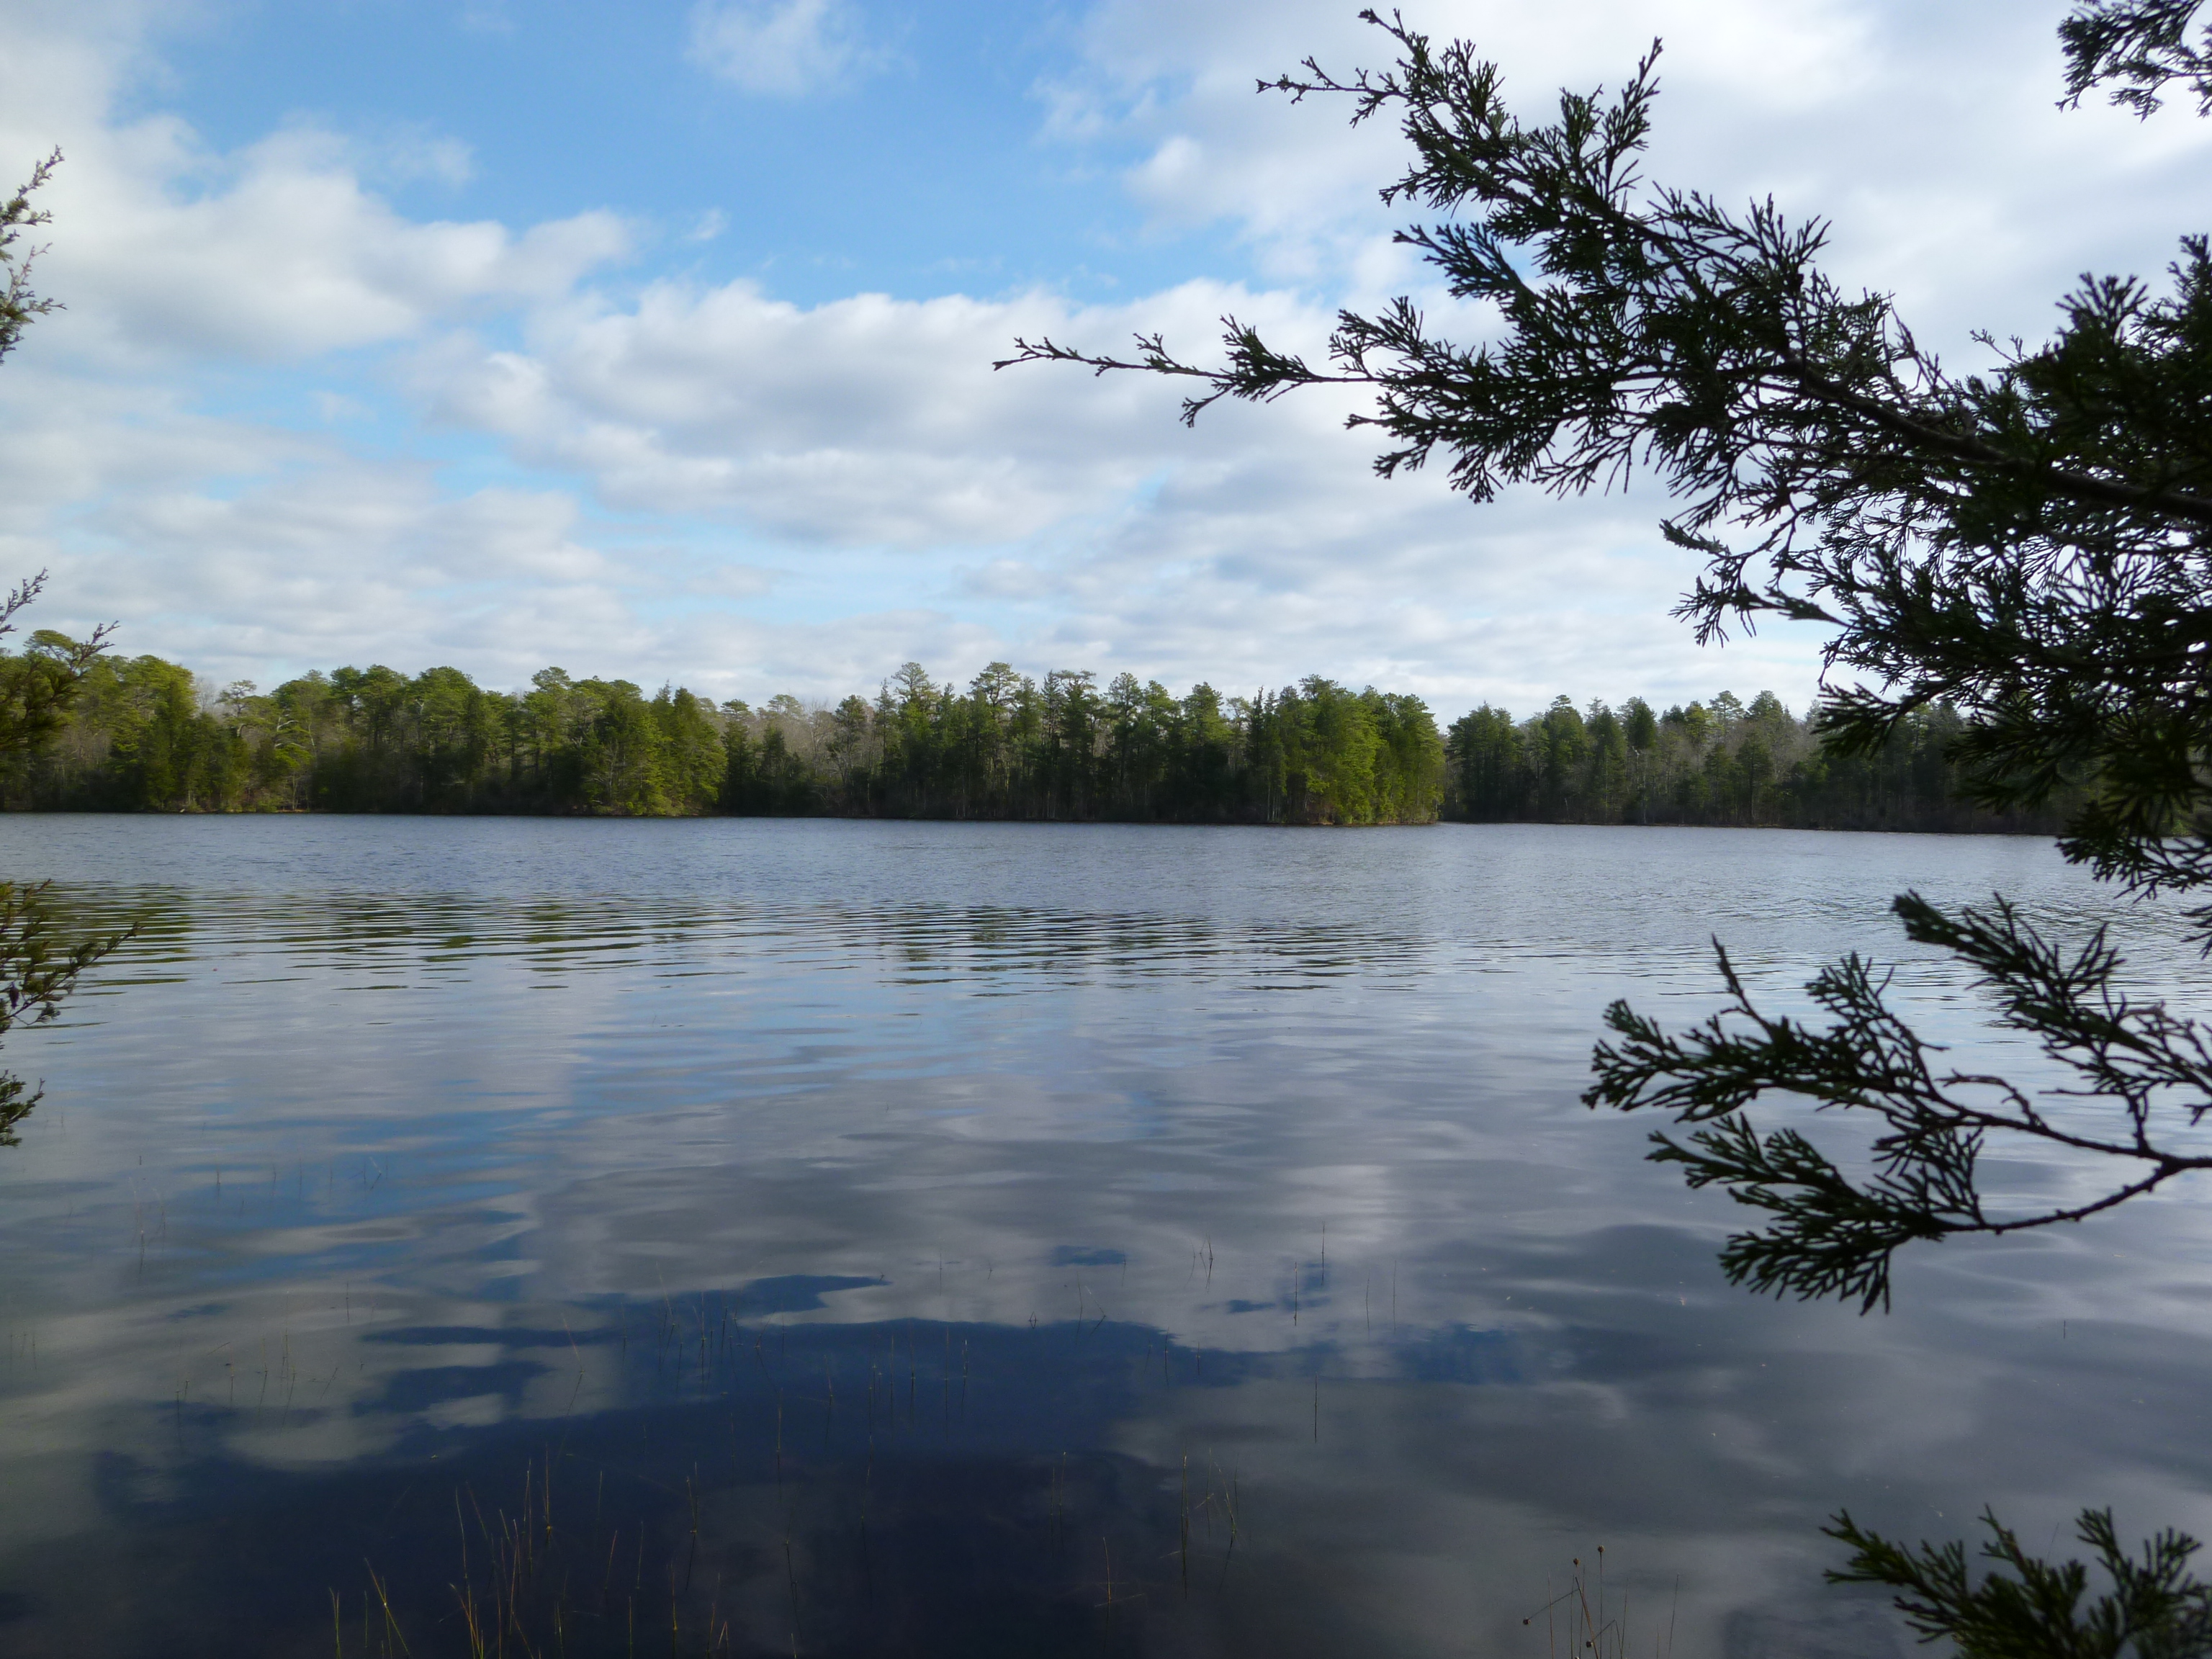 East Creek Pond at Belleplain State Forest - Photo by Daniela Wagstaff